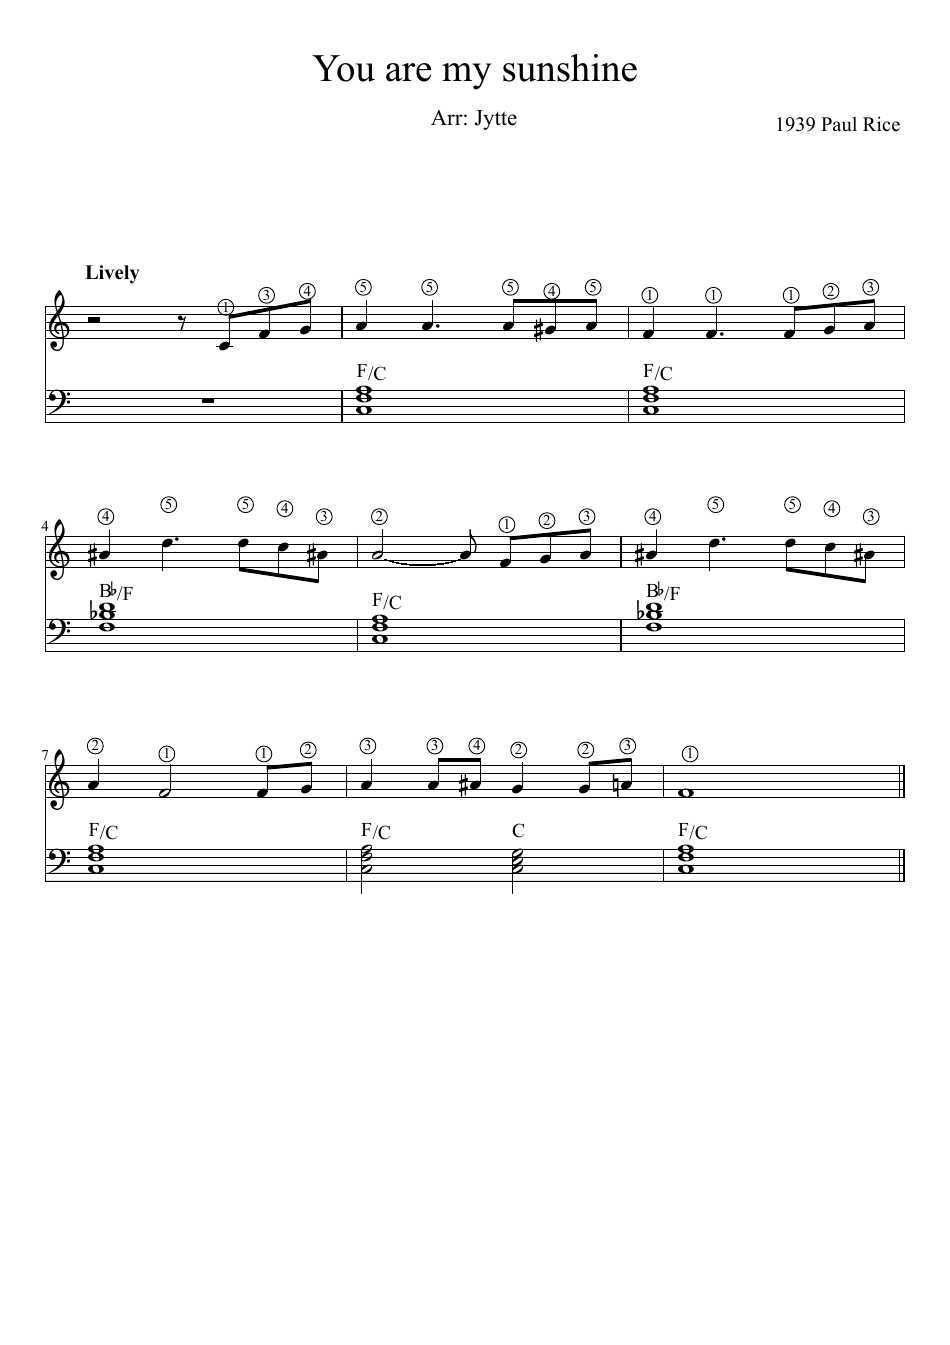 Paul Rice - You Are My Sunshine Piano Sheet Music Preview Image